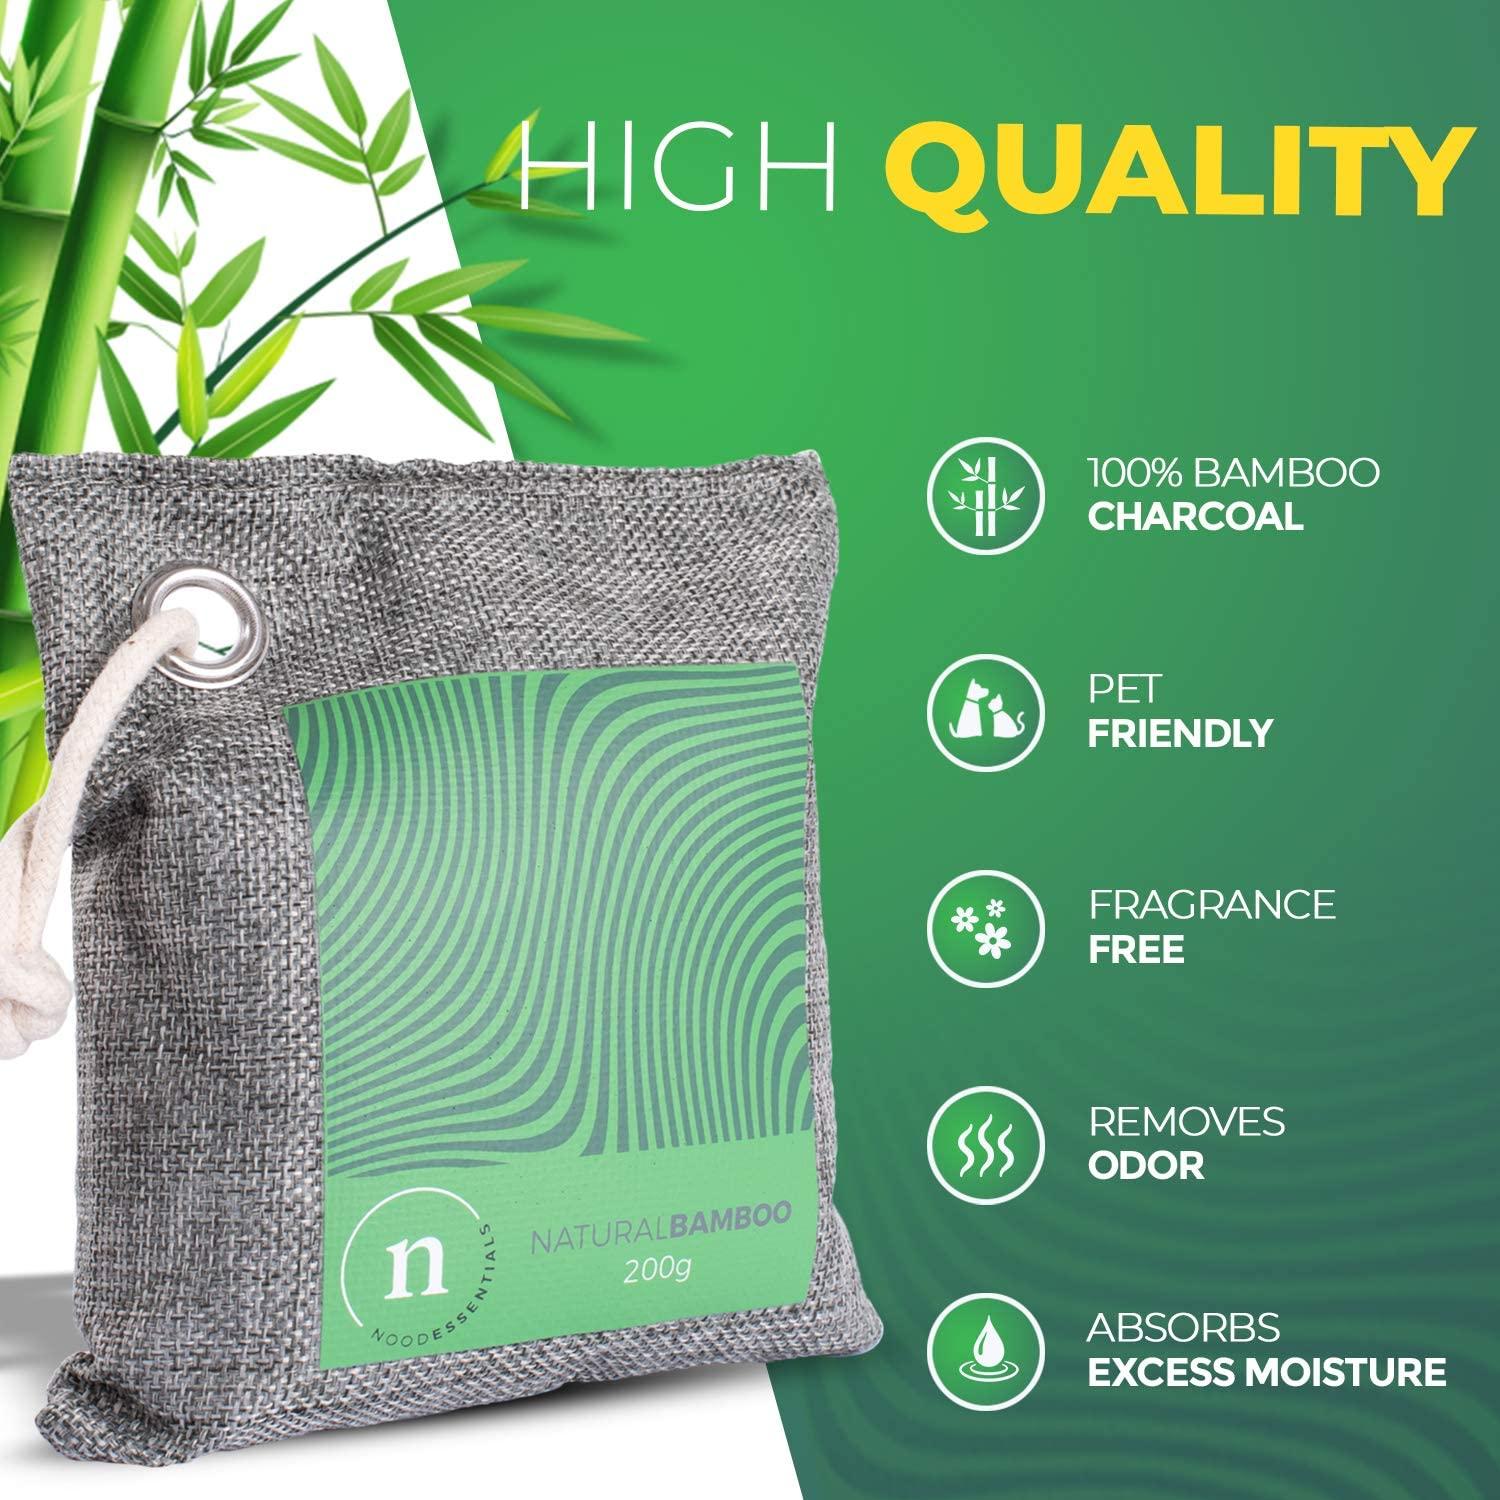 Bamboo Charcoal Bags - Odor Absorber Made of 100% Bamboo and Linen